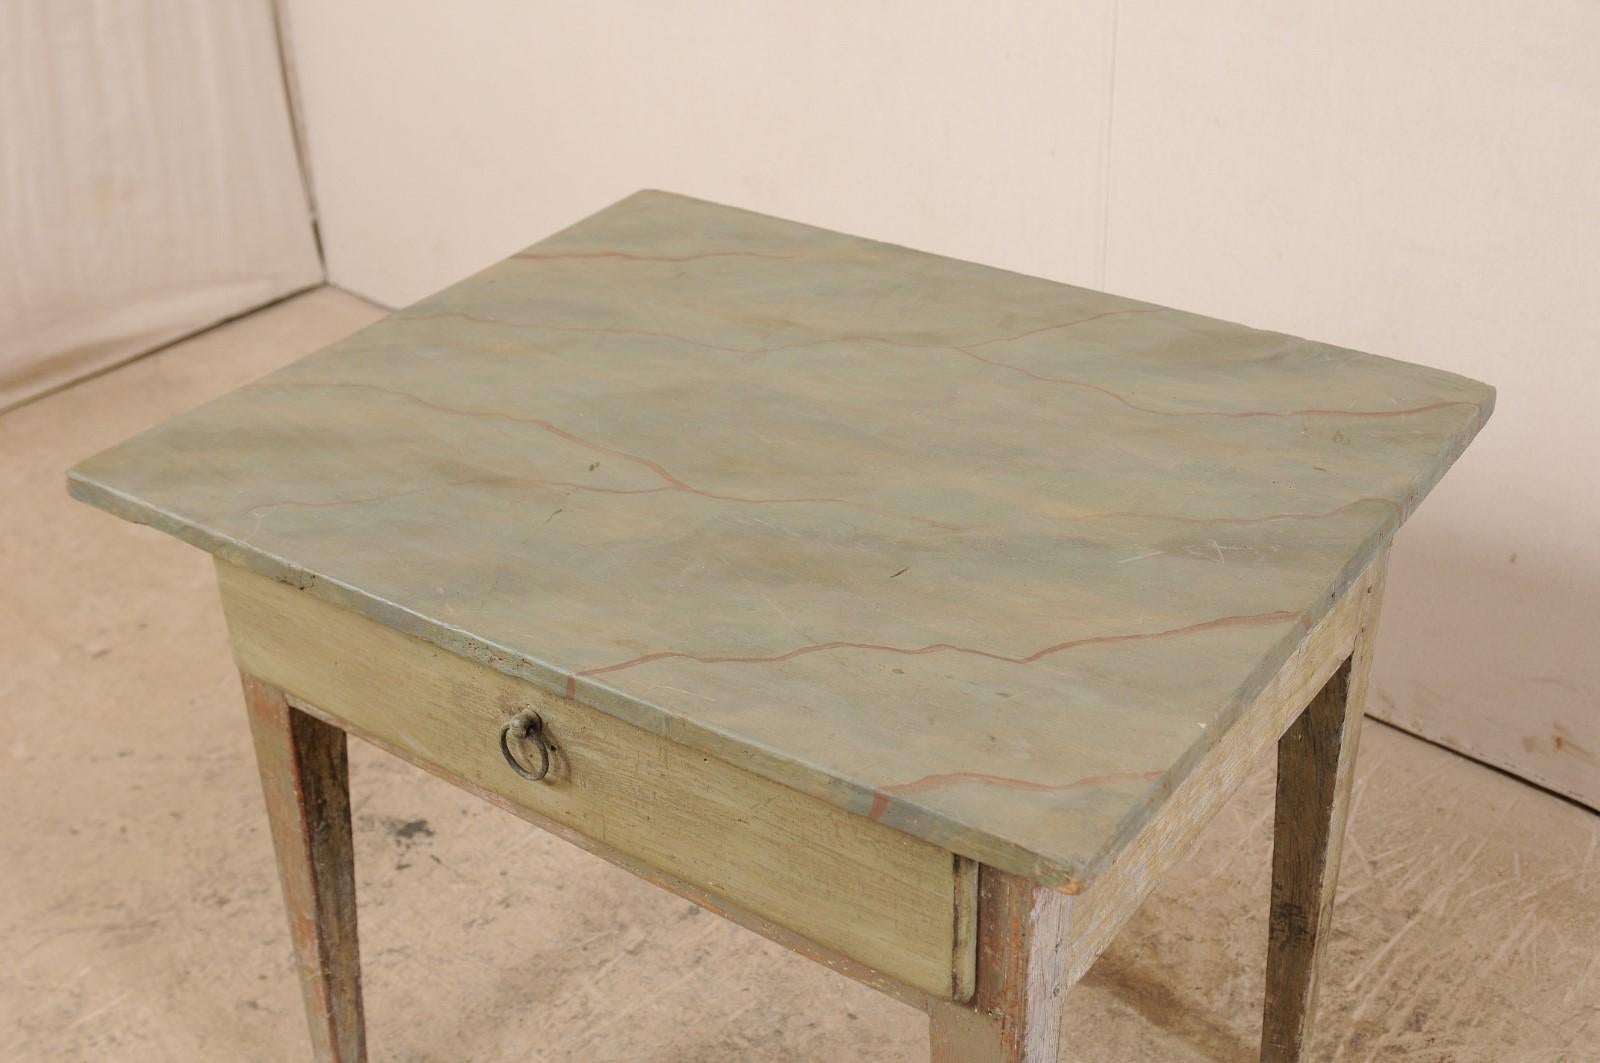 Gustavian Swedish 19th Century Painted Wood Table with Faux Marble Top For Sale